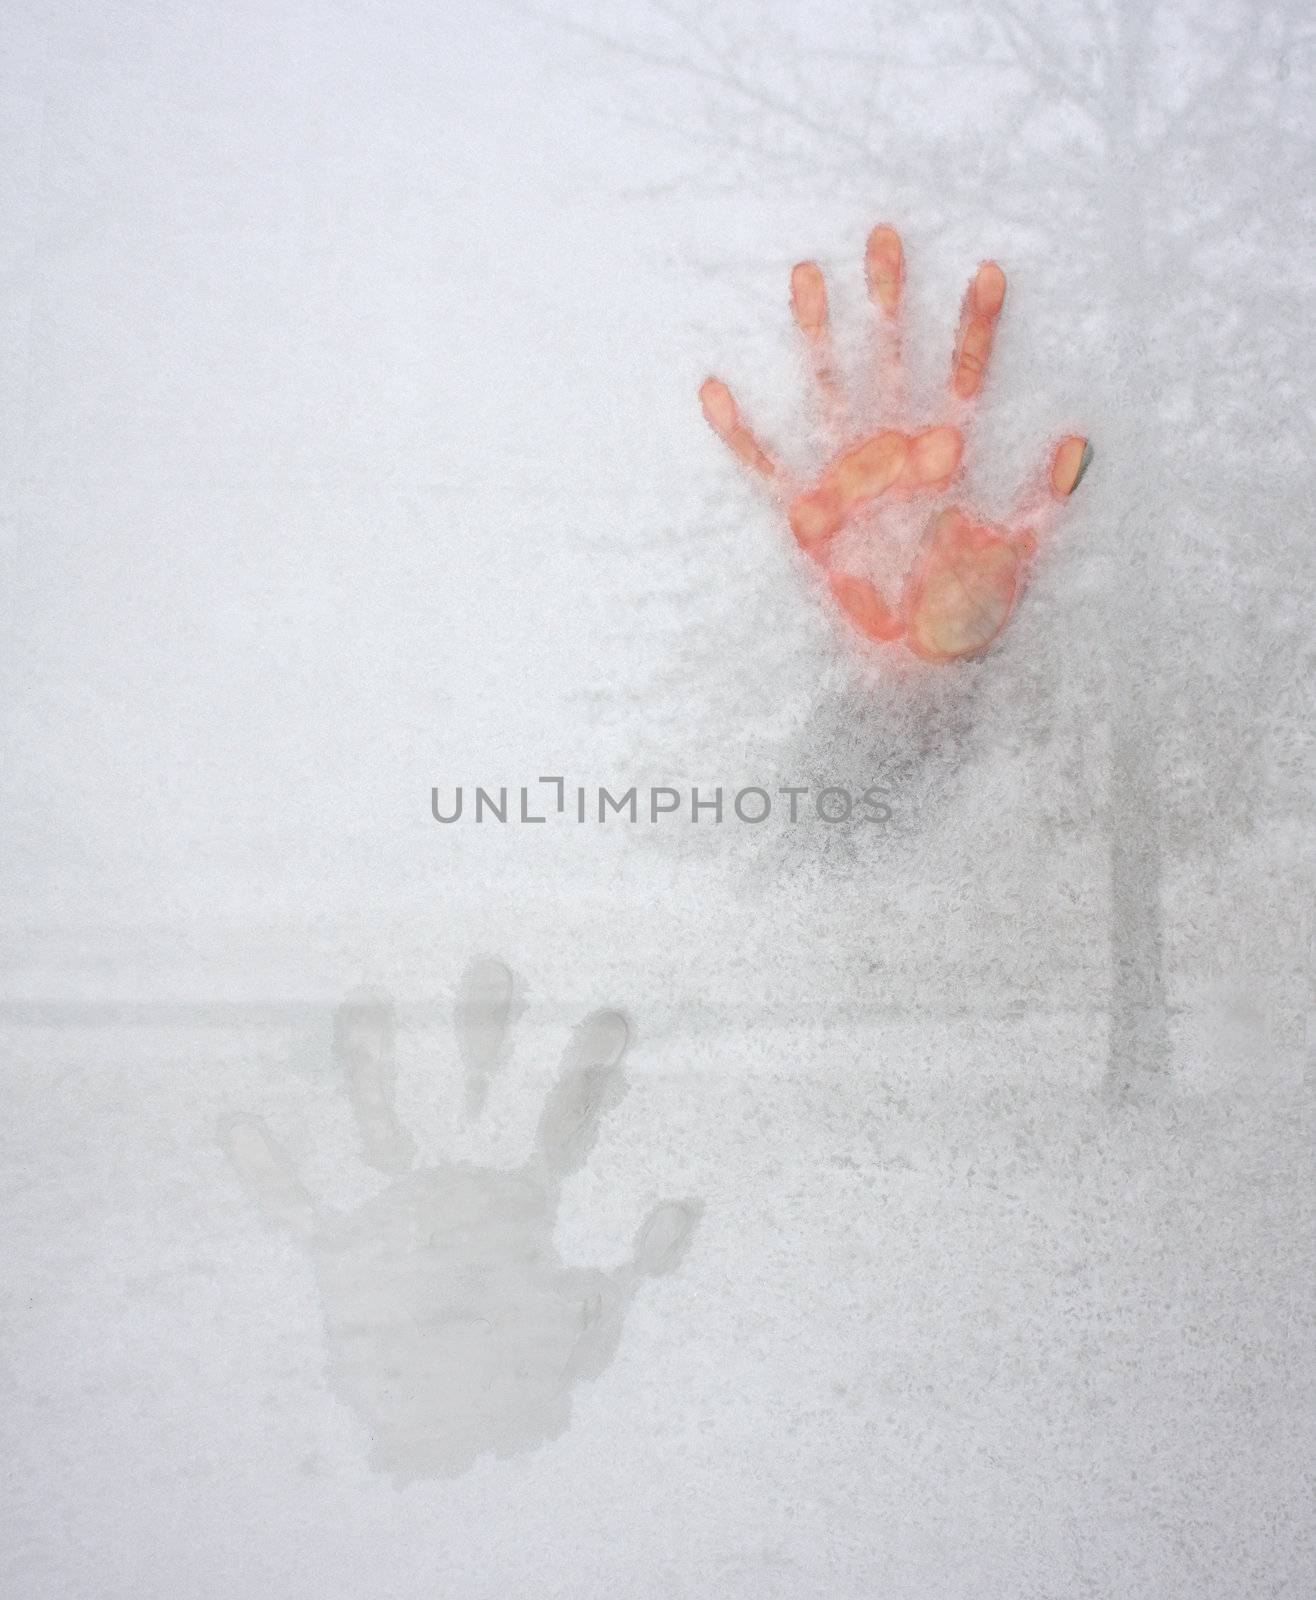 Icy Cold Hand Impression on Window Glass by libyphoto